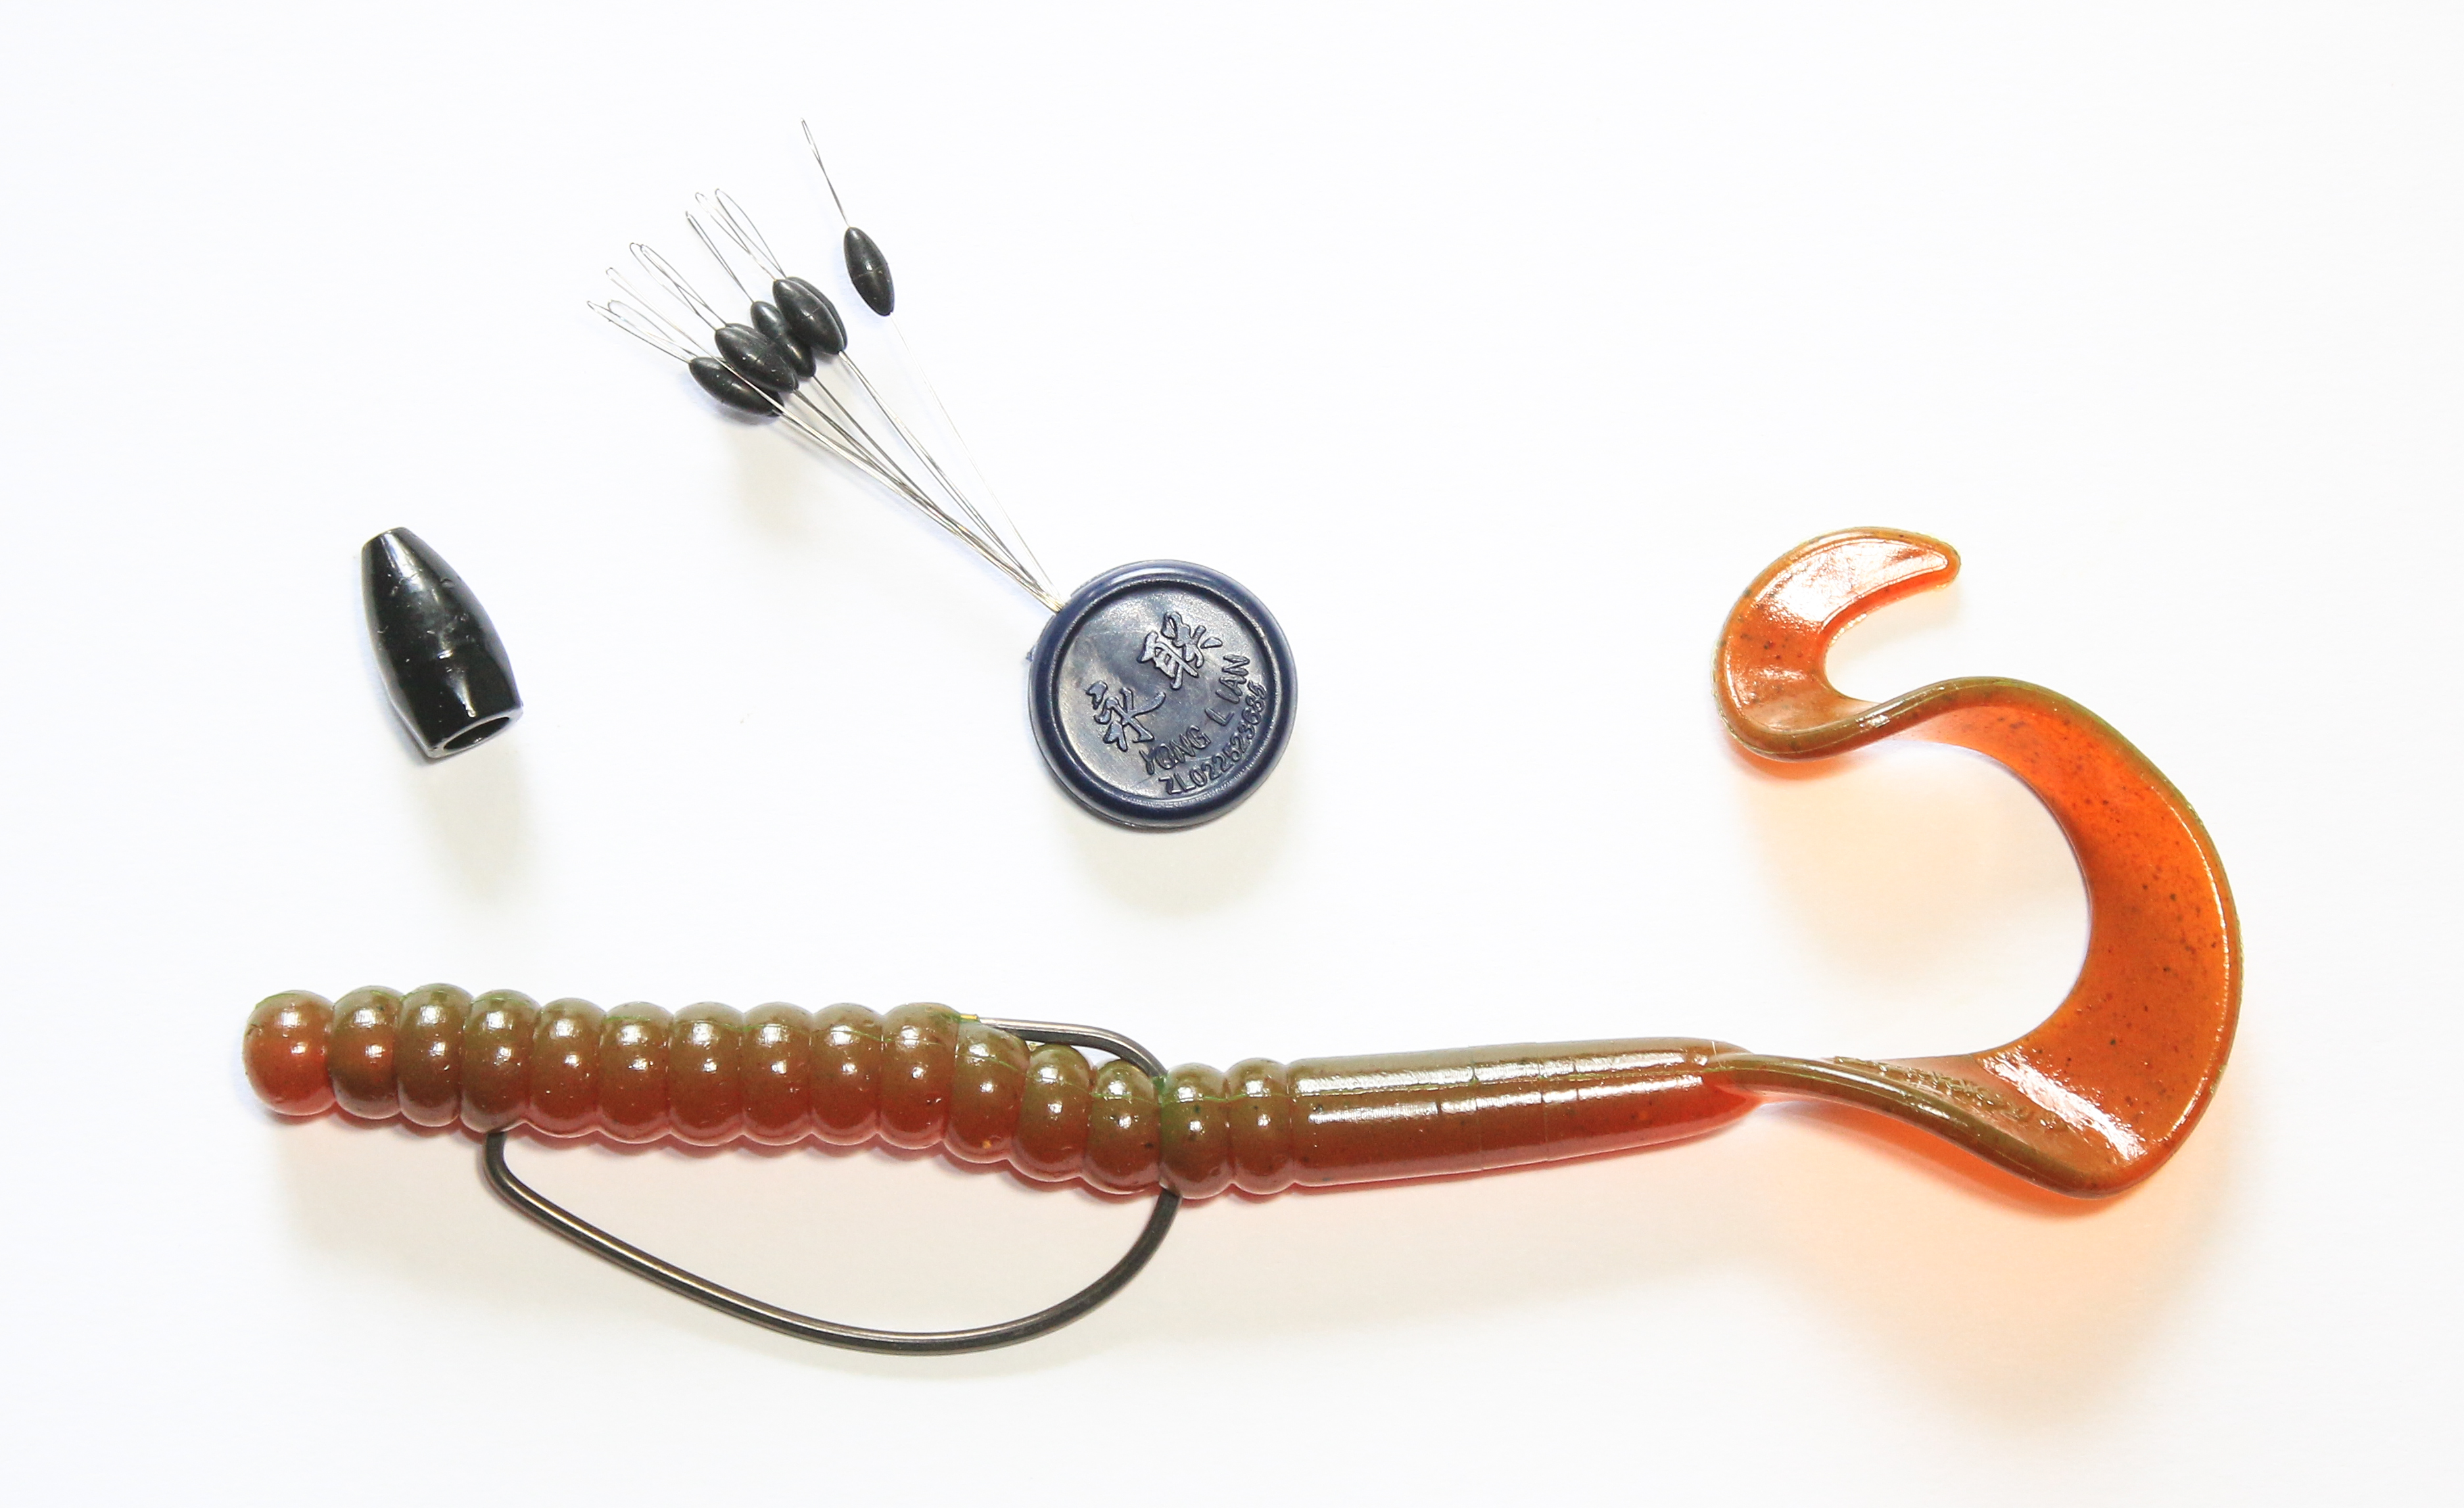 4 Ways to Rig a Bullet Worm Weight to Find Where the Bass Hide